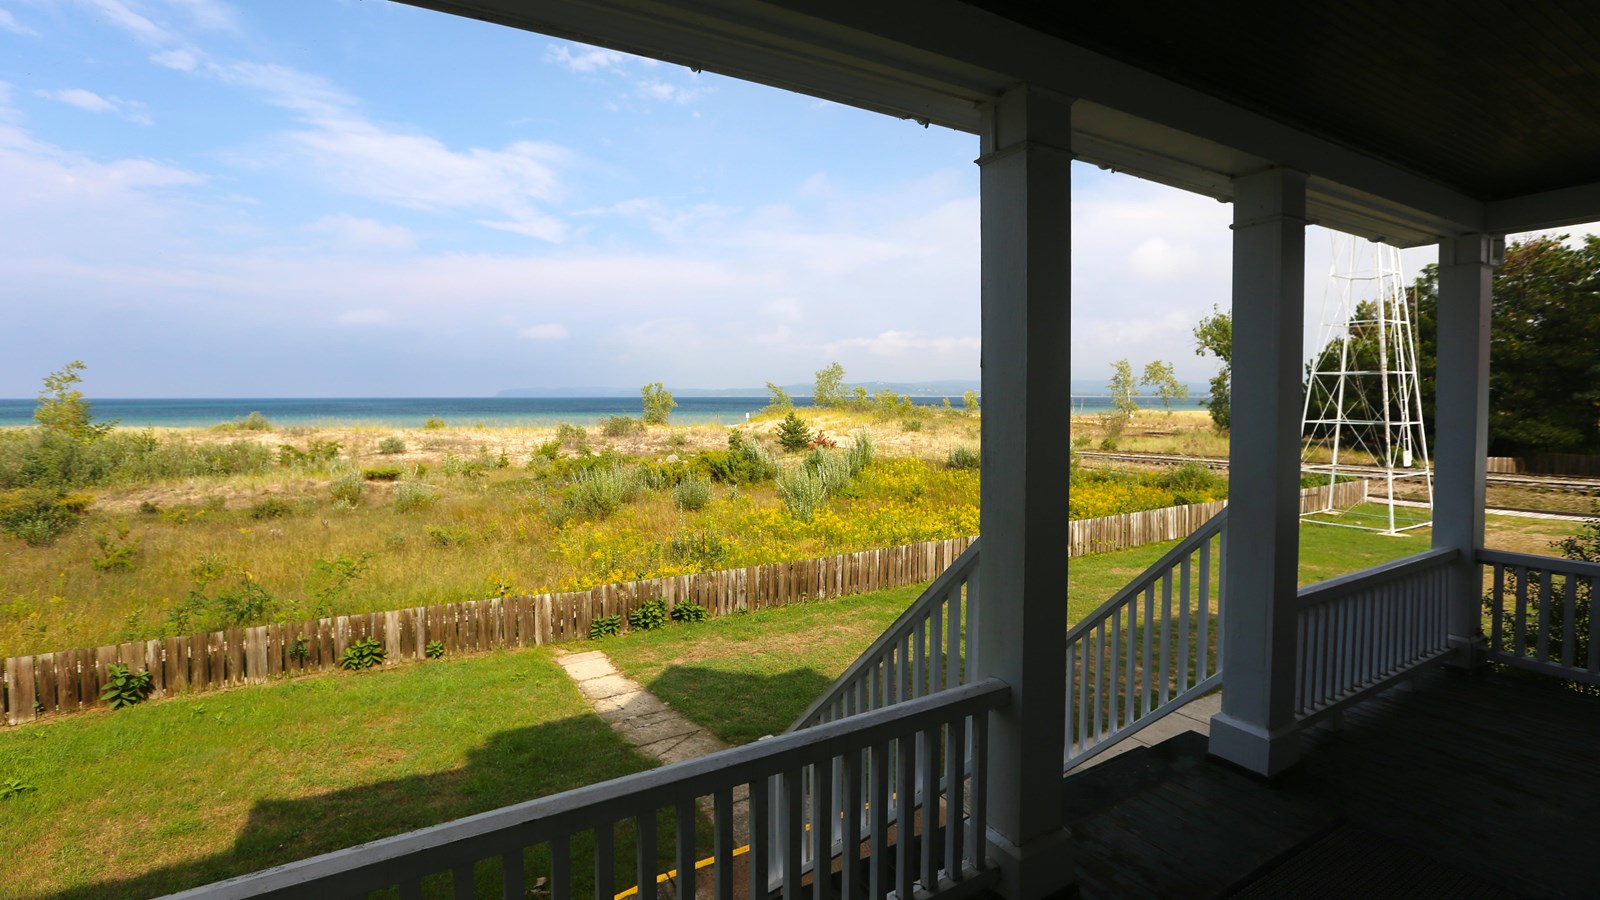 Looking from covered porch toward vegetated dunes, a strip of beach, and deep blue lake